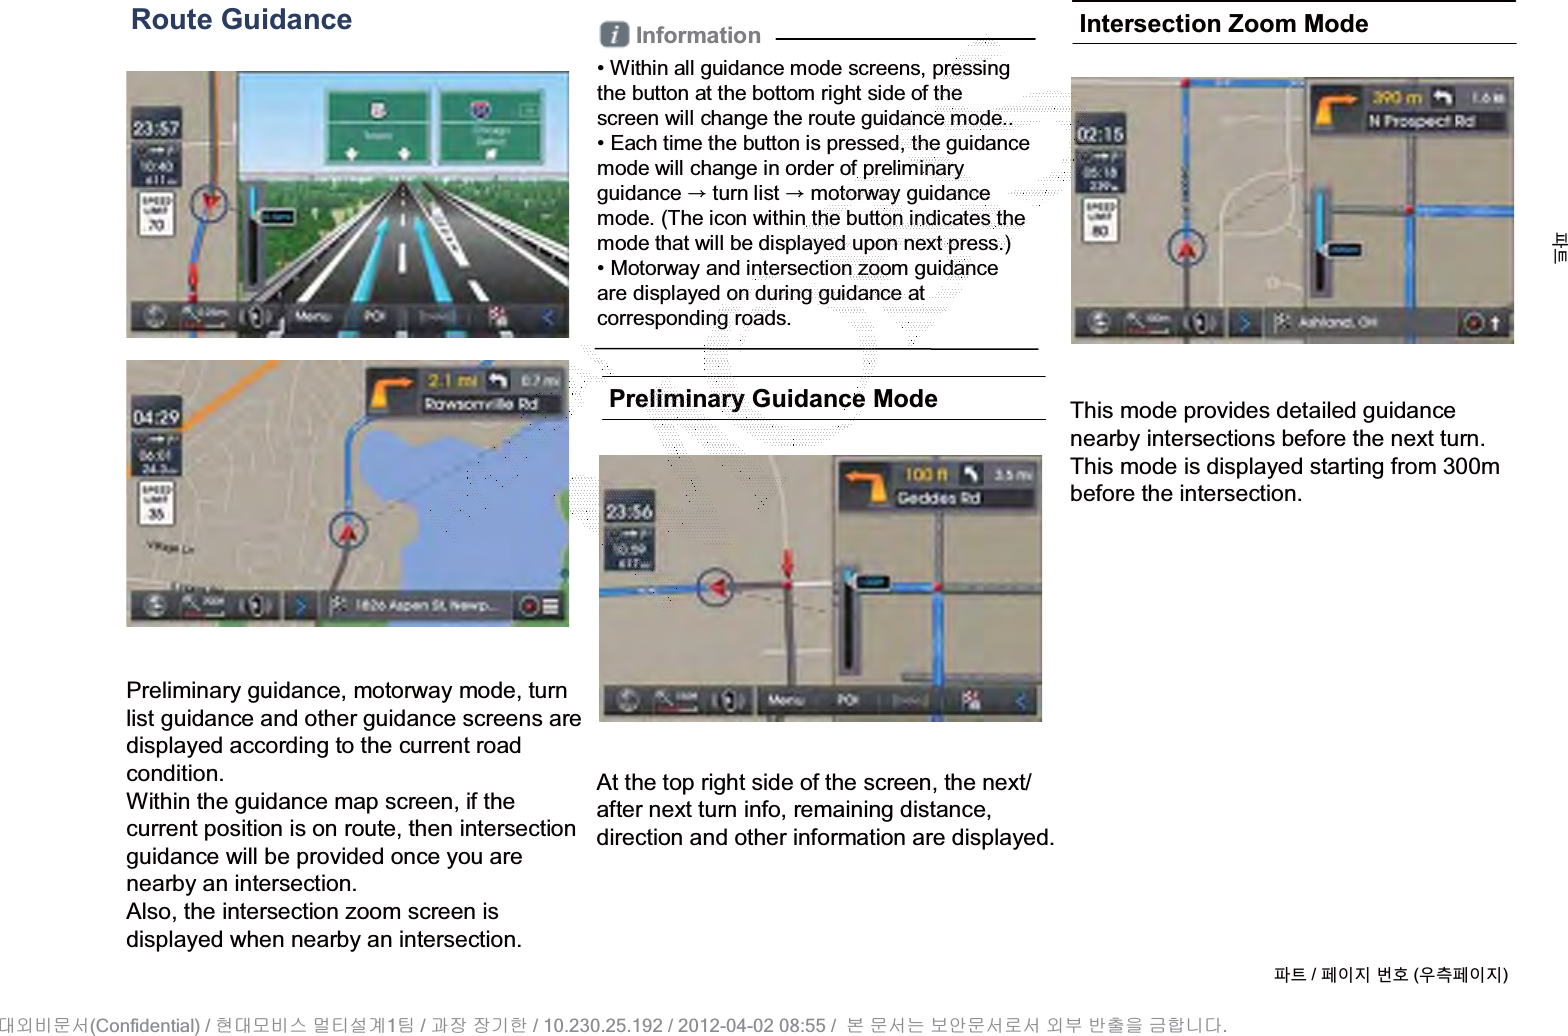 Route GuidancePreliminary guidance, motorway mode, turn list guidance and other guidance screens are displayed according to the current road condition. Within the guidance map screen, if the current position is on route, then intersectionguidance will be provided once you are nearby an intersection. Also, the intersection zoom screen is displayed when nearby an intersection.Information• Within all guidance mode screens, pressingthe button at the bottom right side of thescreen will change the route guidance mode.. • Each time the button is pressed, the guidance mode will change in order of preliminary guidance ȥturn list ȥmotorway guidance mode. (The icon within the button indicates the mode that will be displayed upon next press.)• Motorway and intersection zoom guidanceare displayed on during guidance at corresponding roads.Preliminary Guidance ModeAt the top right side of the screen, the next/ after next turn info, remaining distance, direction and other information are displayed.Intersection Zoom ModeThis mode provides detailed guidancenearby intersections before the next turn.This mode is displayed starting from 300m before the intersection.ળઝ / ૓ࢇए ء୎ (ࡉ্૓ࢇए)ળઝ(Confidential) /    1  /     / 10.230.25.192 / 2012-04-02 08:55 /             .␴㞬⽸ⱬ㉐ 䜸␴⯜⽸㏘ ⭴䐤㉘᷸ 䐴 Ḱ㣙 㣙ὤ䚐 ⸬ ⱬ㉐⏈ ⸨㙼ⱬ㉐⦐㉐ 㞬⺴ ⵌ㻐㡸 Ἴ䚝⏼␘